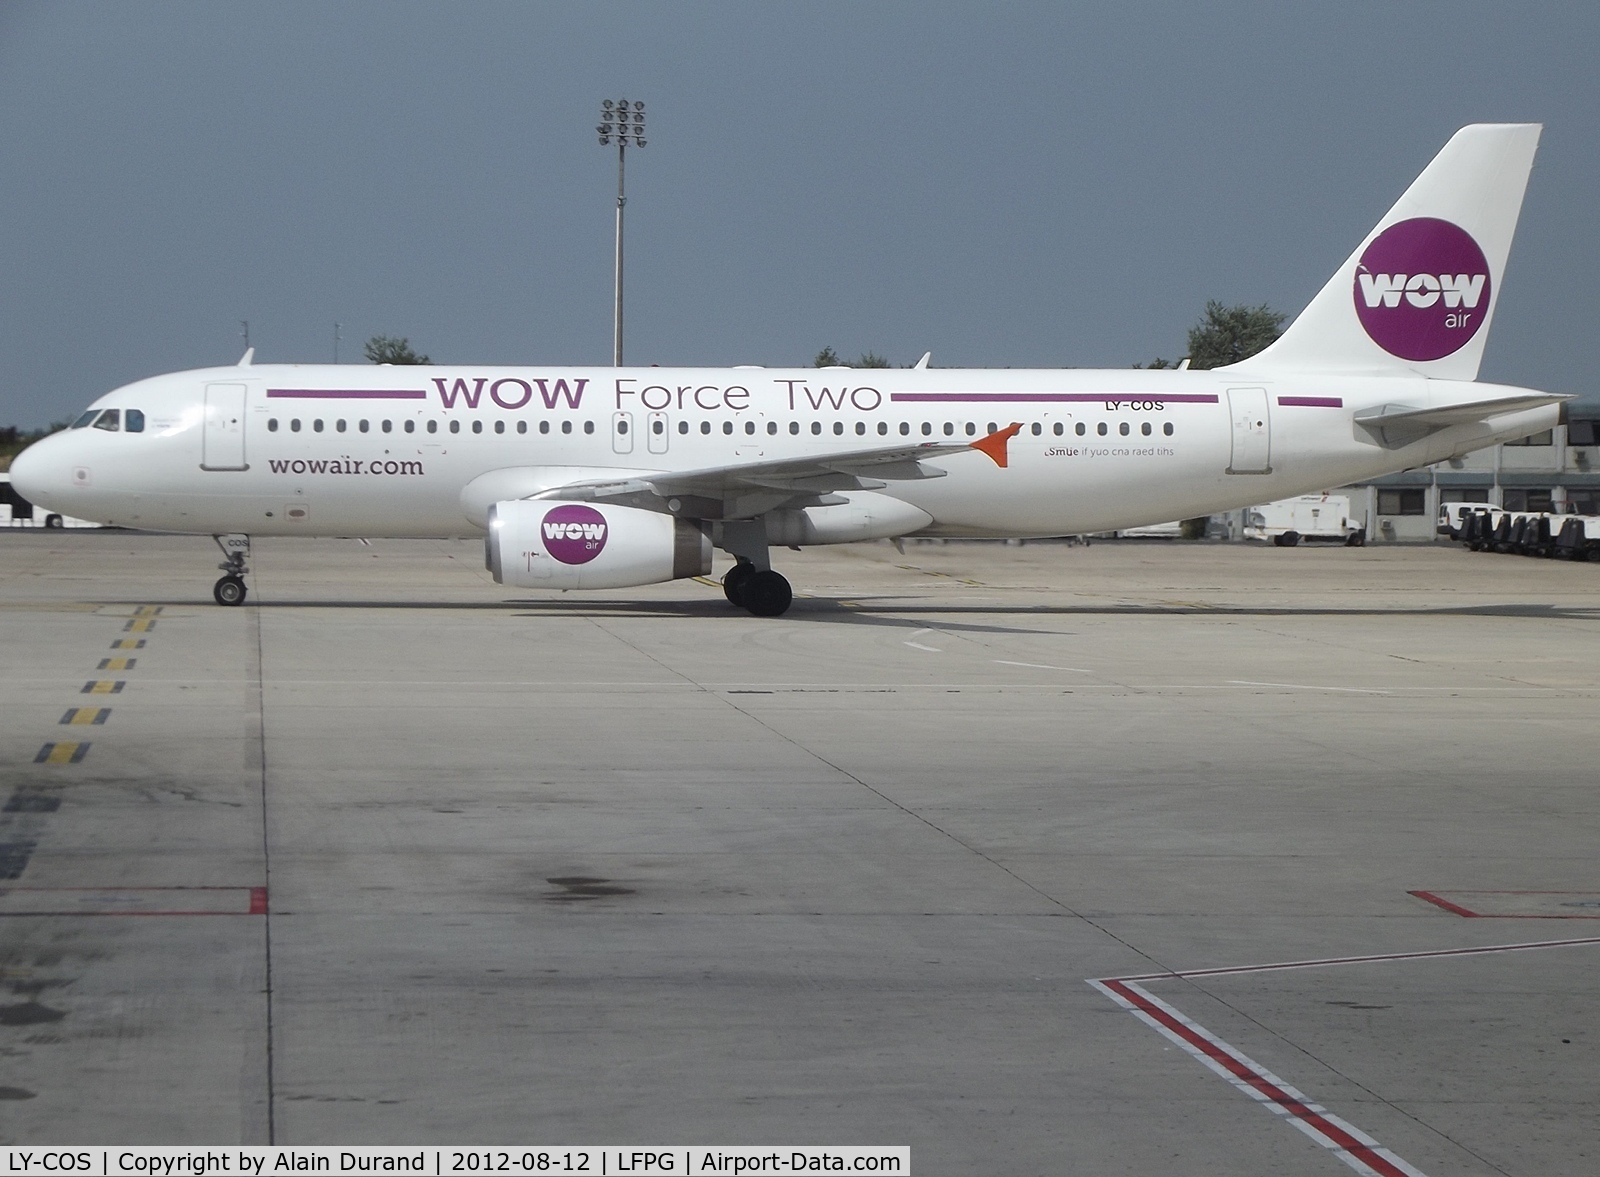 LY-COS, 1994 Airbus A320-231 C/N 415, Also operated by Avion Express on behalf of Wow Air as WOW Force Two is powered by IAE2500 engines unlike sister-ship LY-VEY which comes out with CFM56 power.